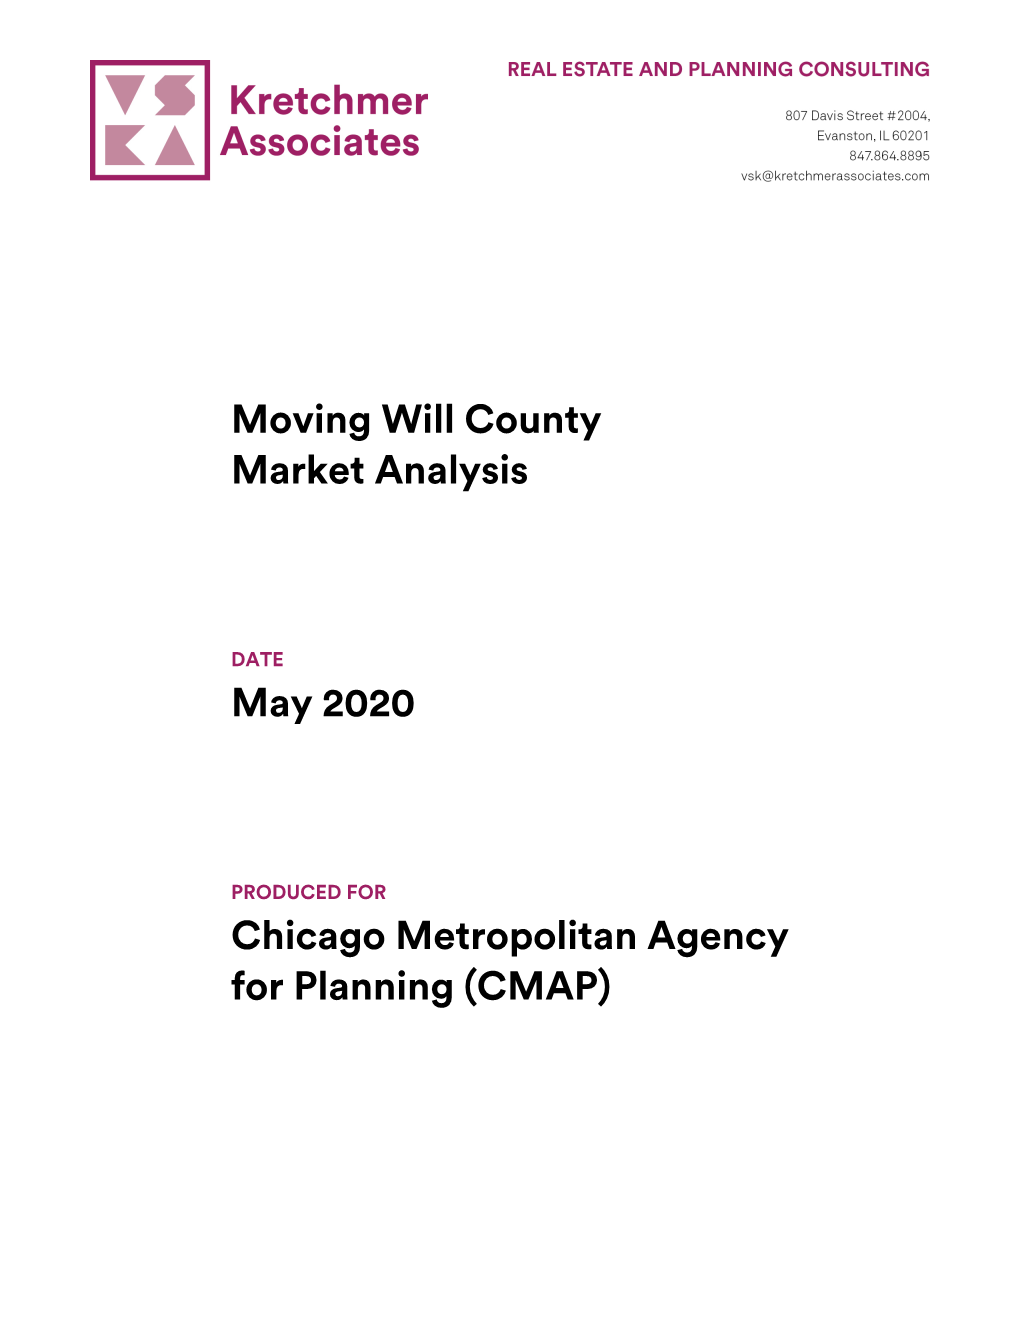 Moving Will County Market Analysis May 2020 Chicago Metropolitan